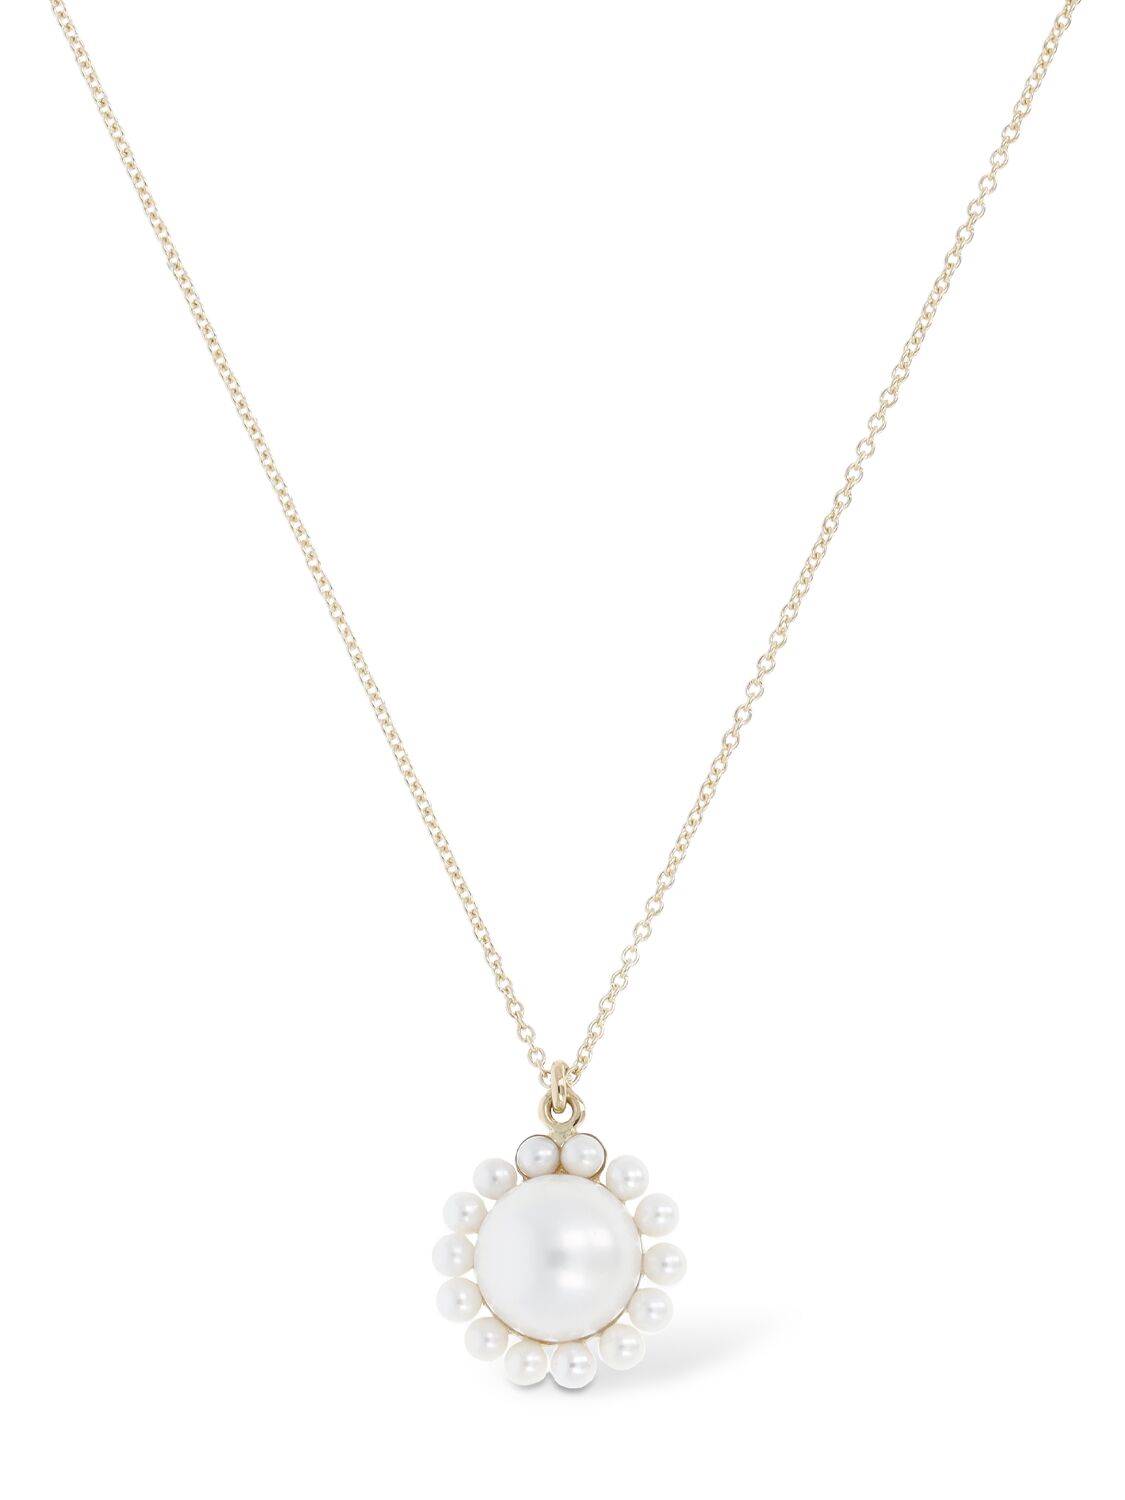 Image of Jeanne Simple 14kt & Pearl Necklace